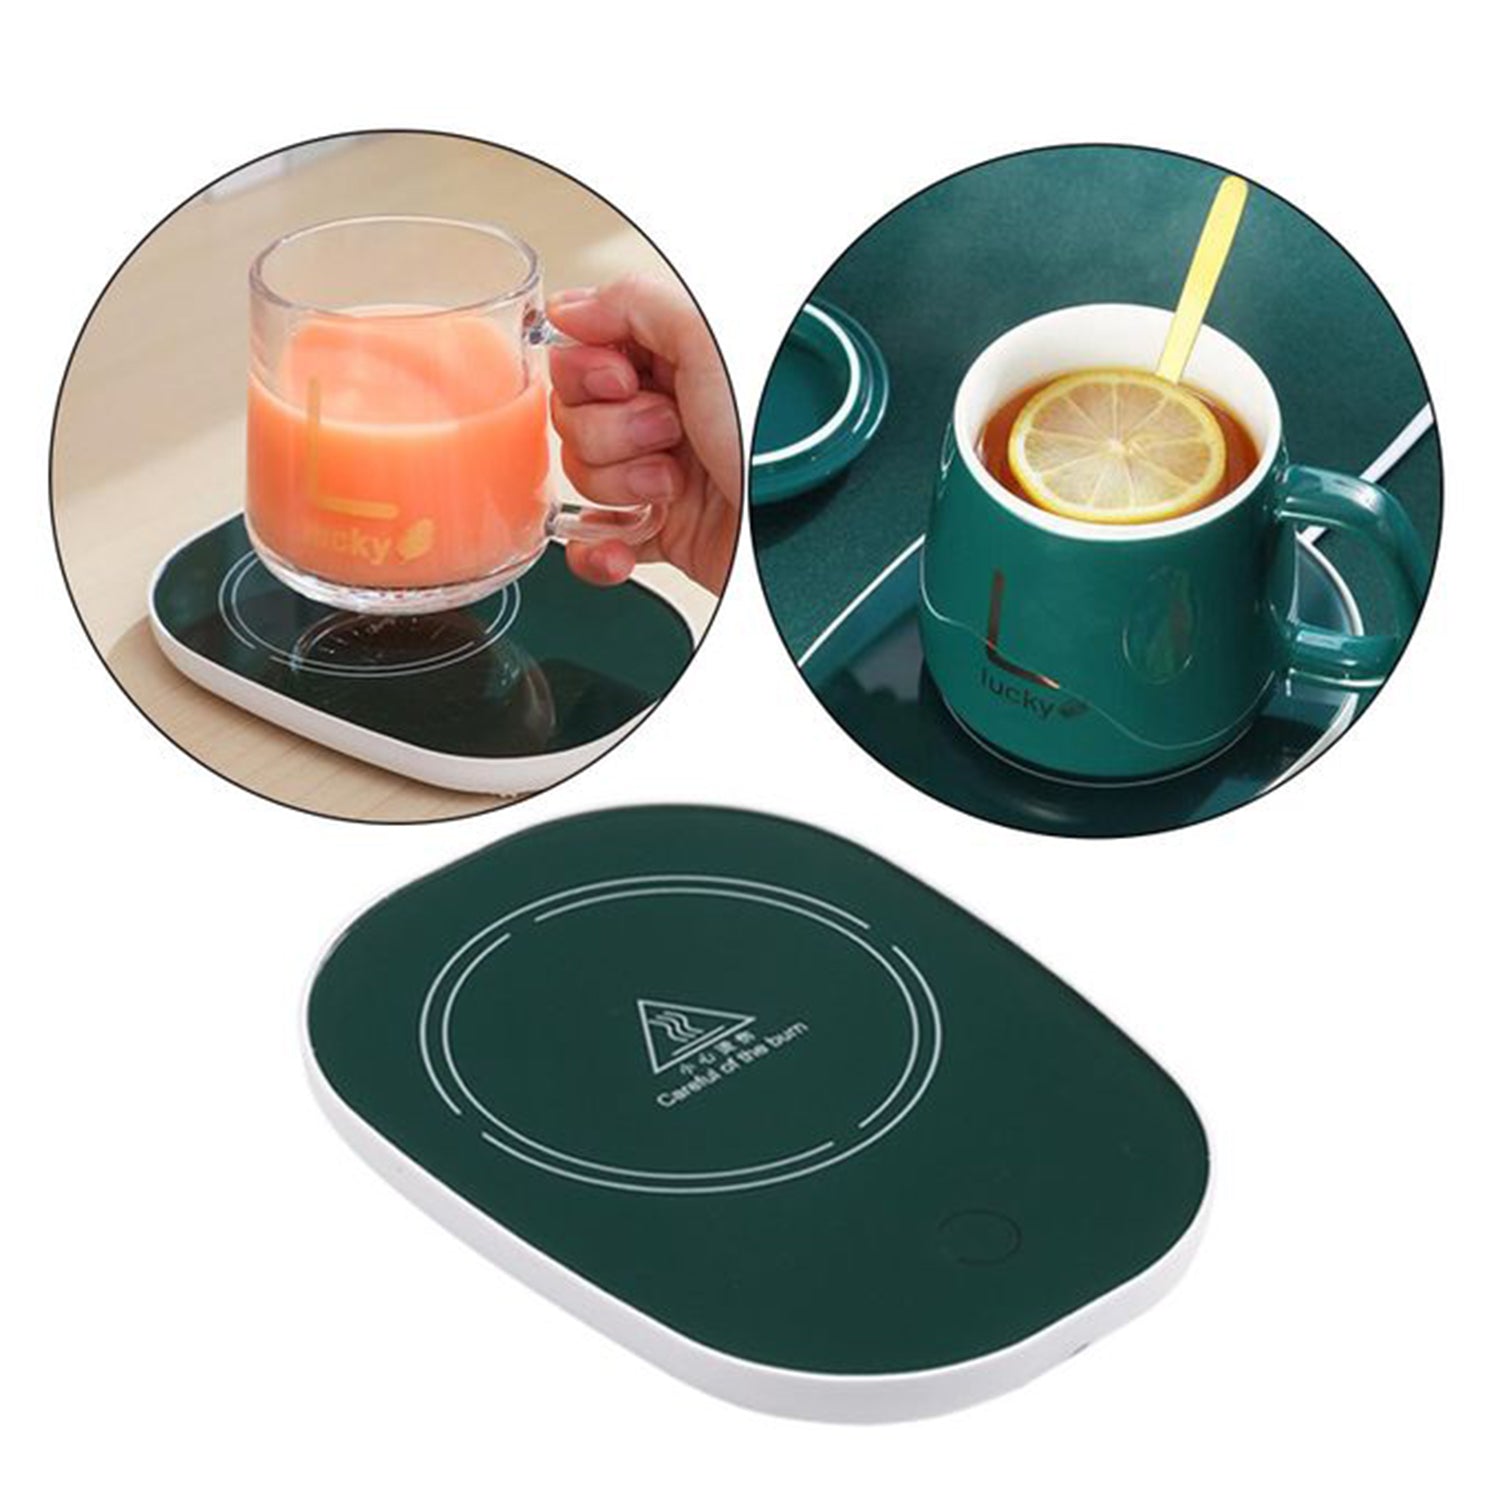 2792A Coffee Mug Warmer For Having Coffee Along With The Warmer That Keeps It Hot. Dukandaily